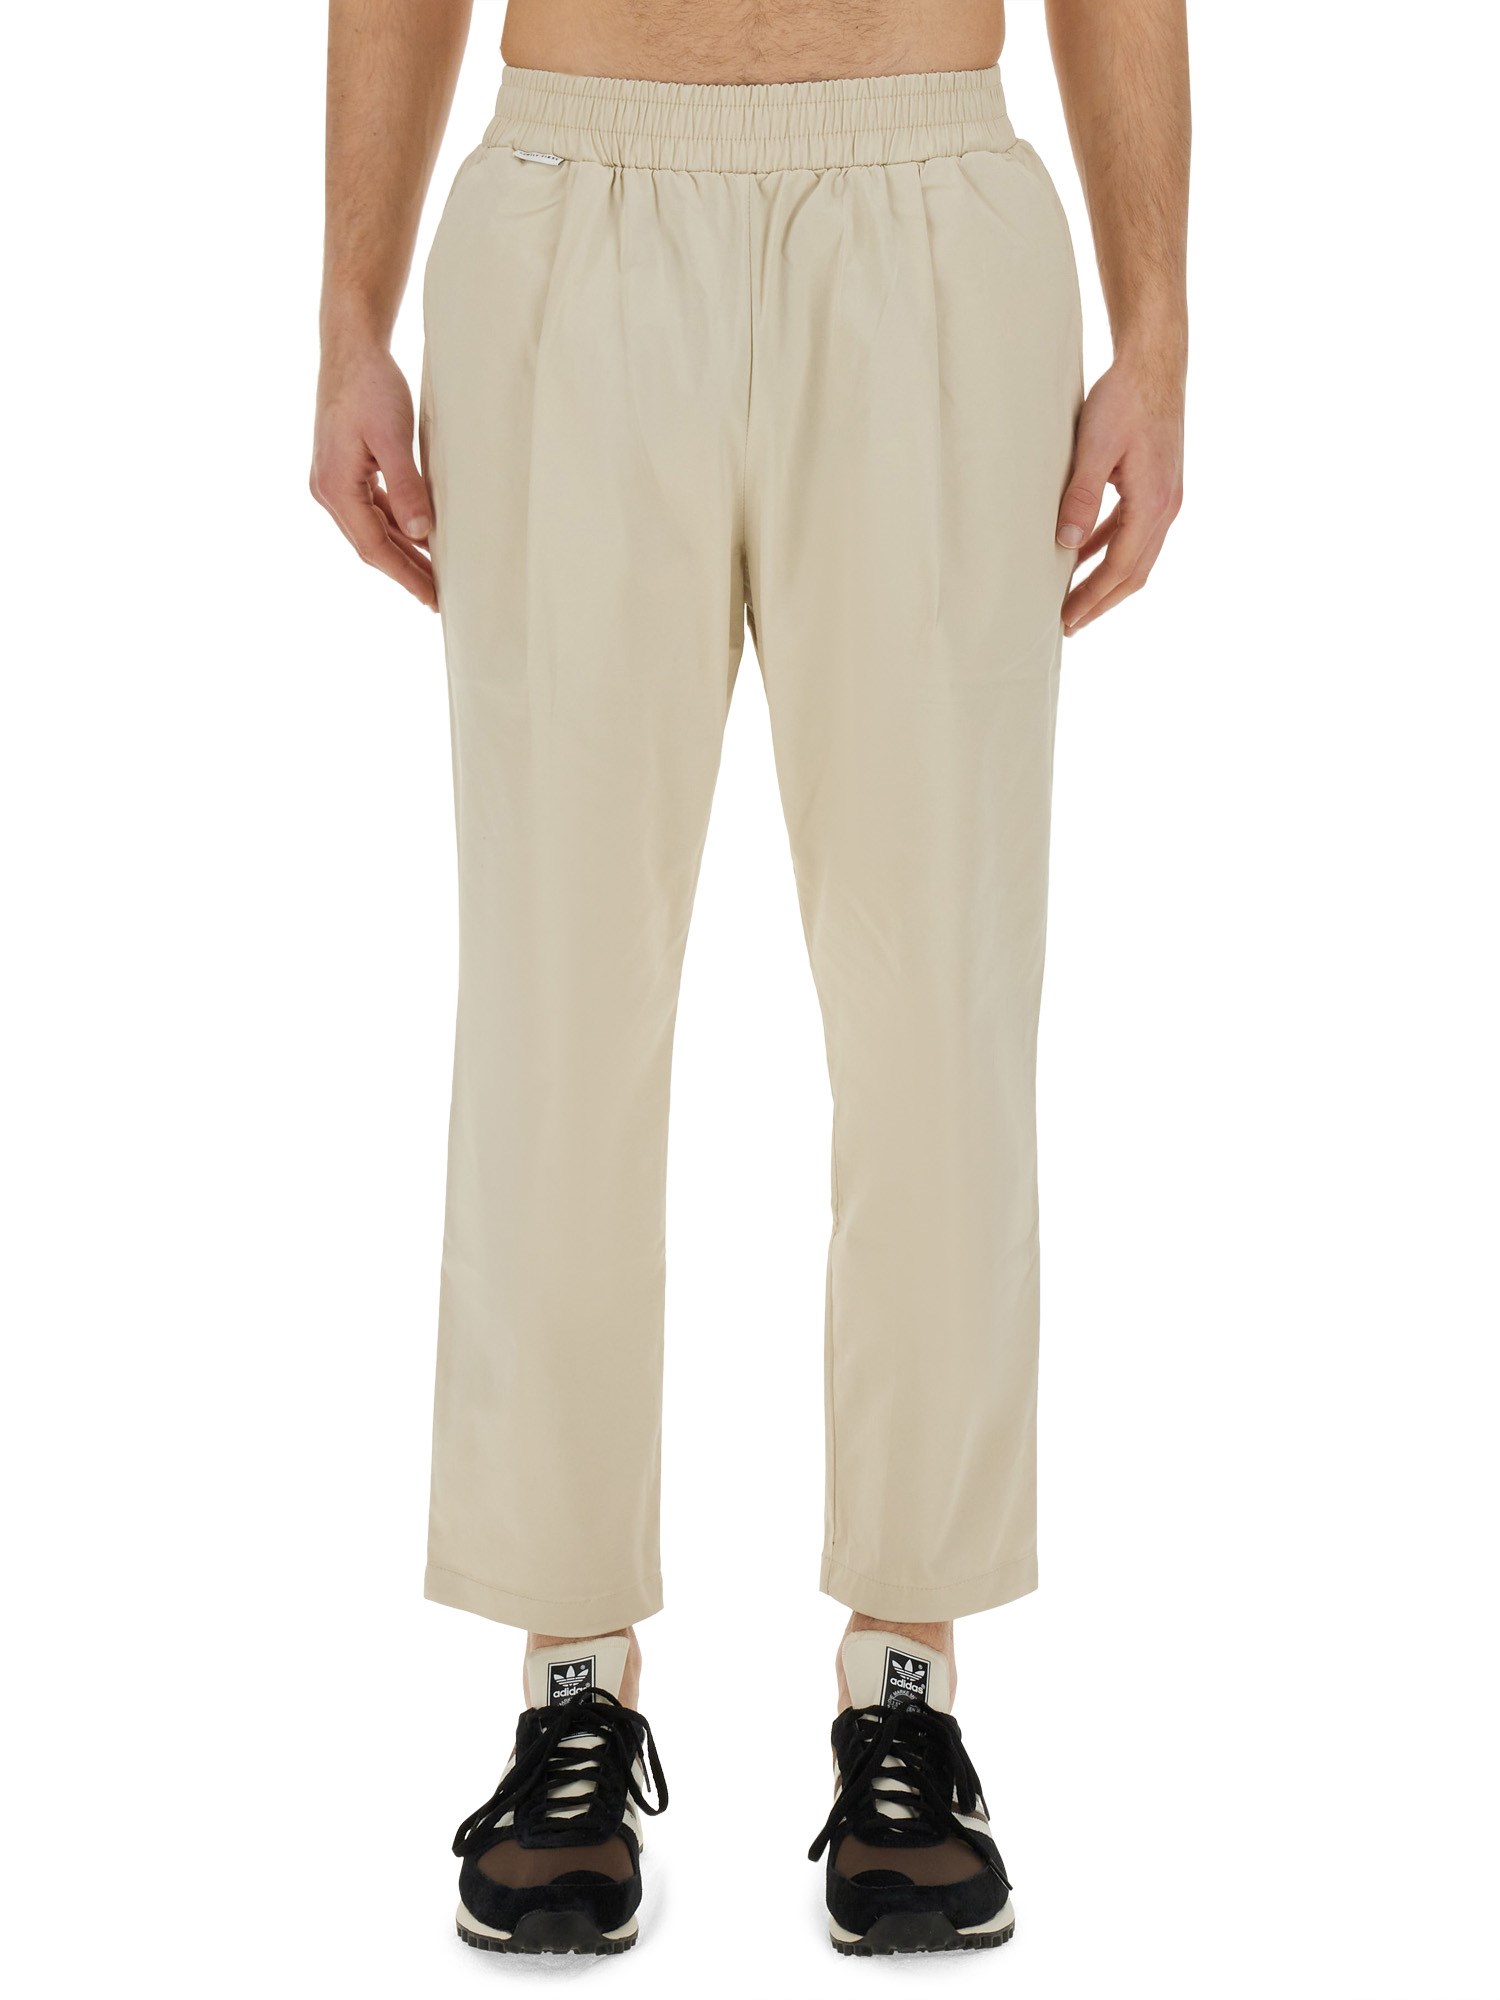 Family First family first chino pants